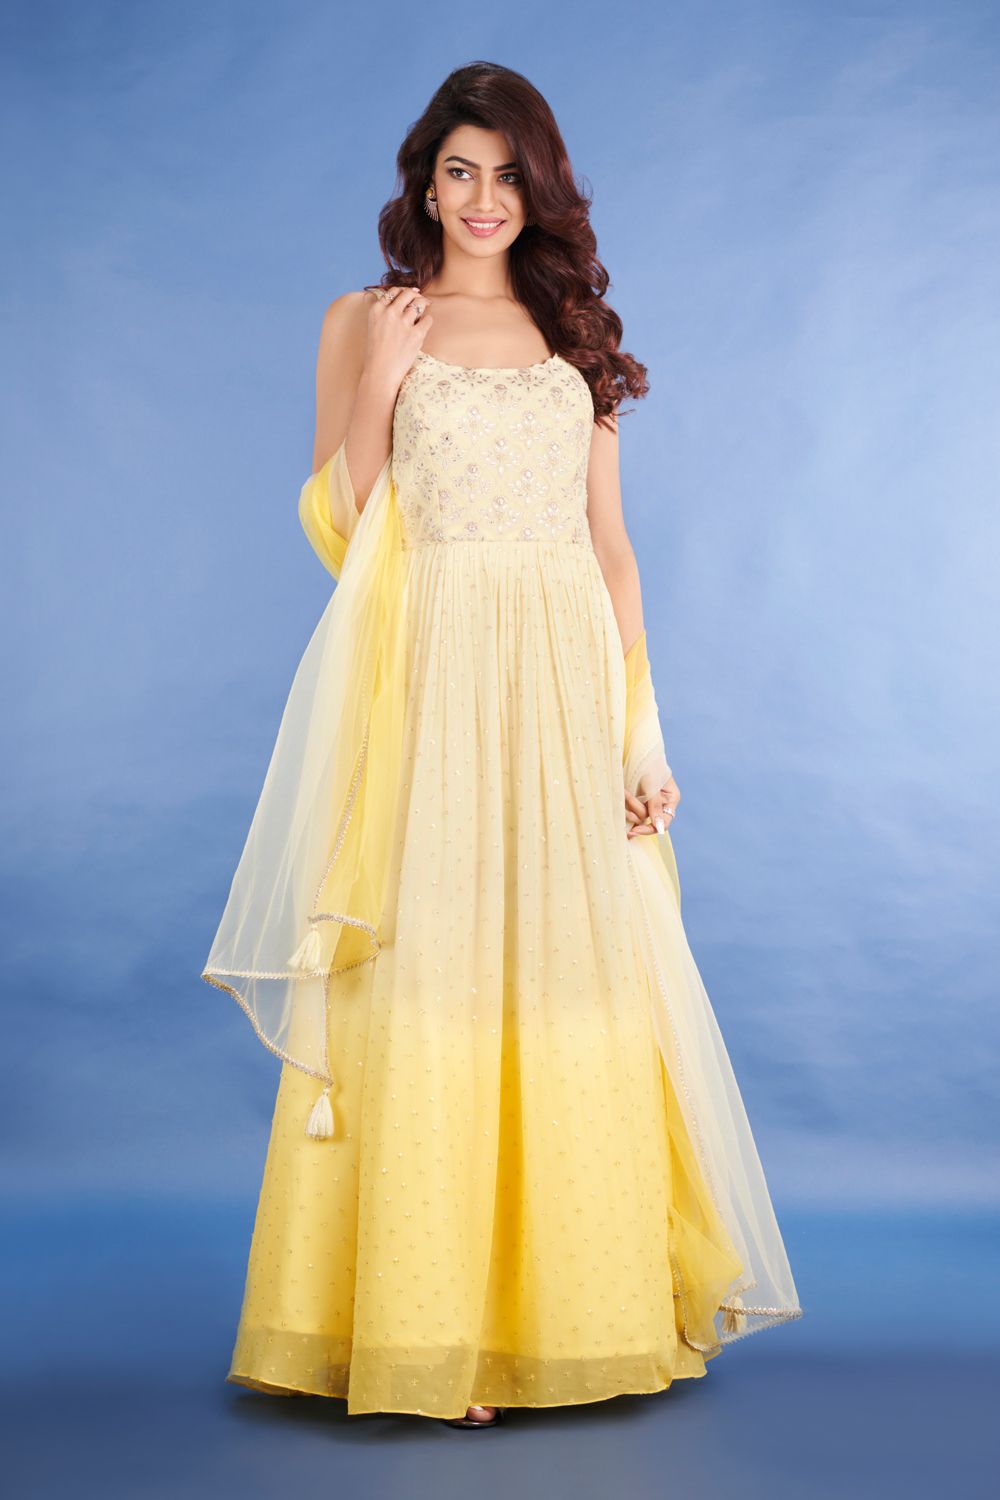 Very Refreshing Yellow Color Dress| Lemon Colour Dress| Light Yellow Dress|  Yellow Suit Comb… | Womens trendy dresses, Easy trendy outfits, Pakistani  dresses casual